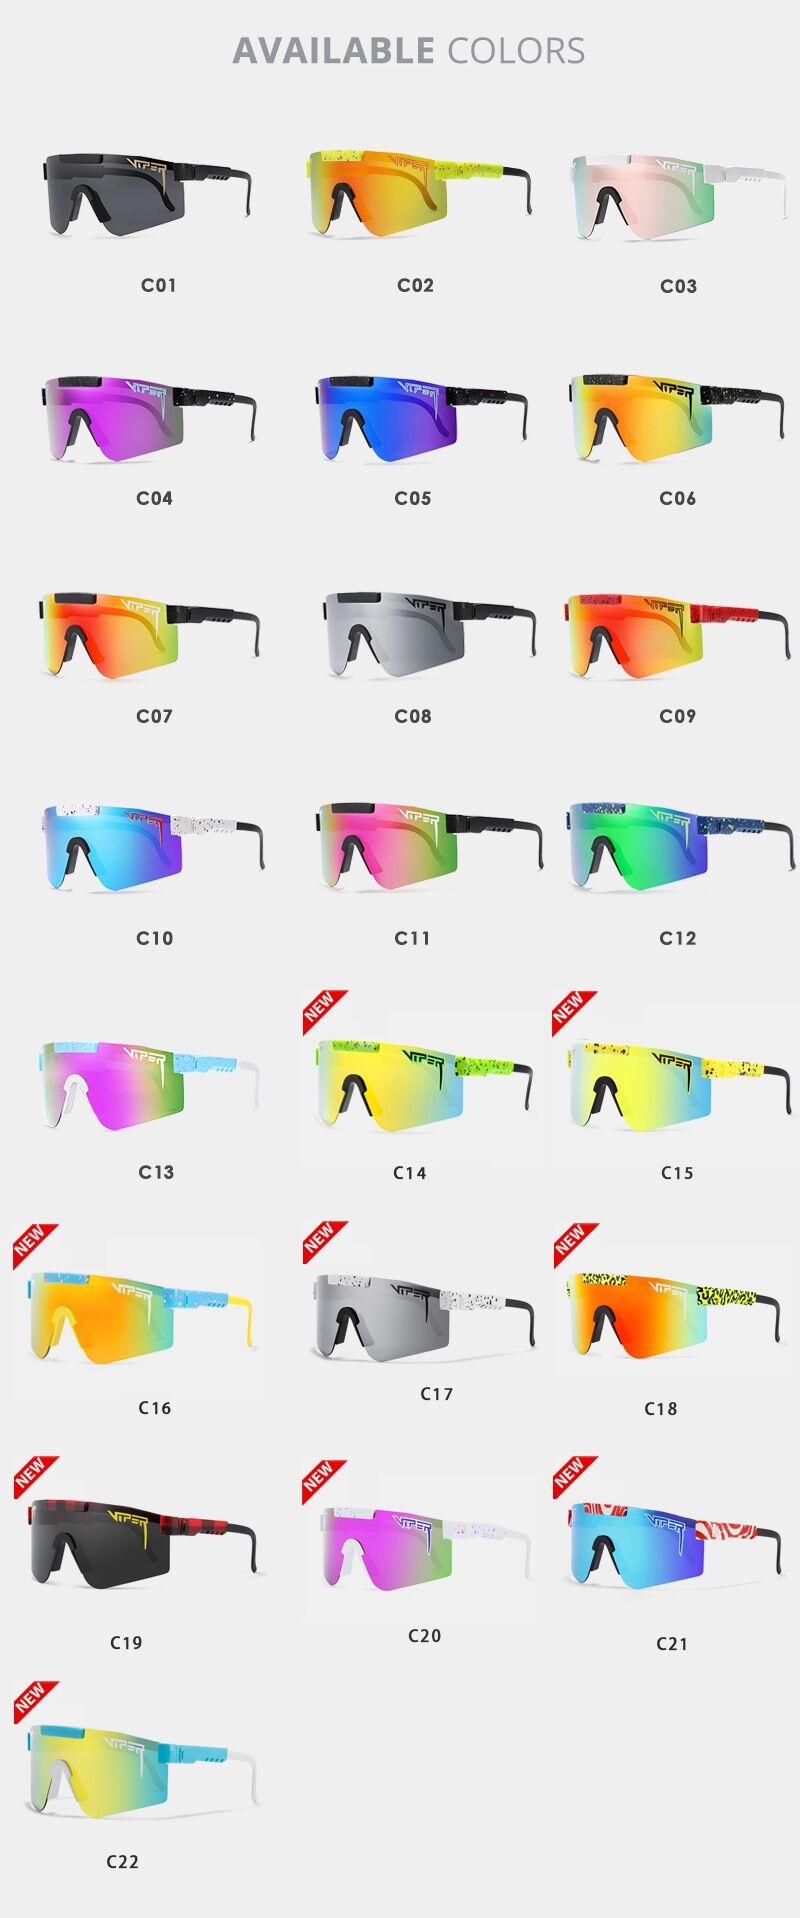 /dlxpv-pit-viper-windproof-cycling-sport-polarized-sunglasses-product/